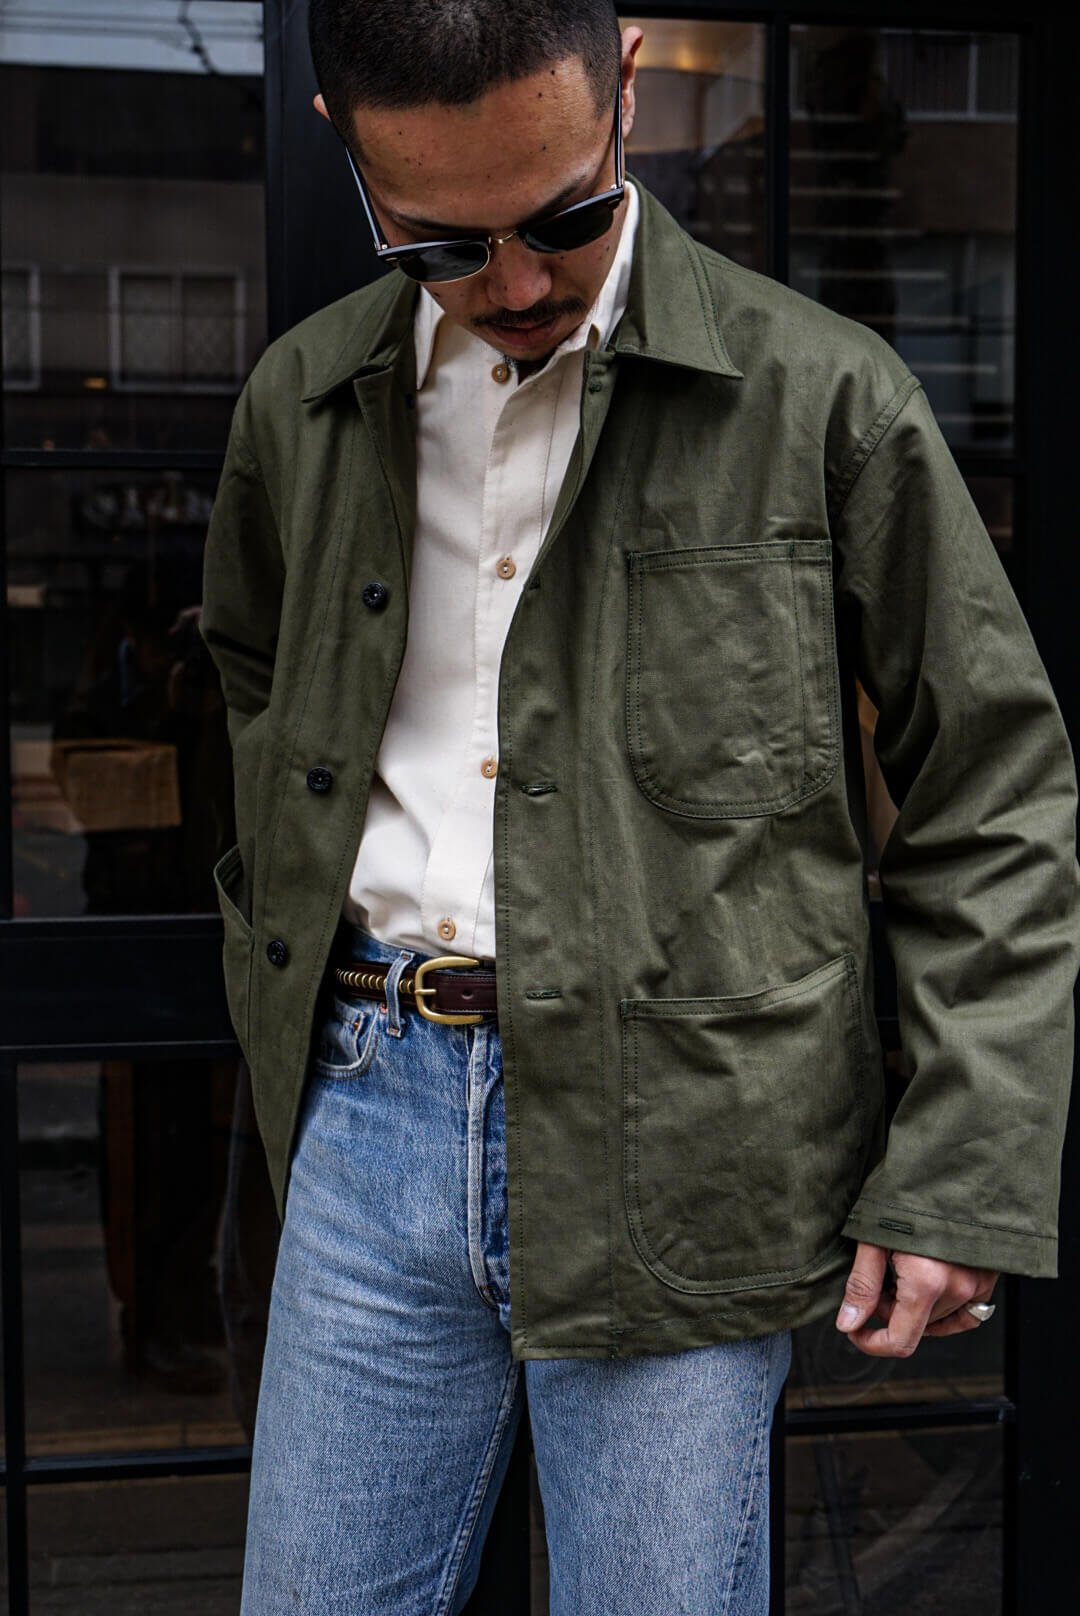 N-3 JACKET - MADE IN USA